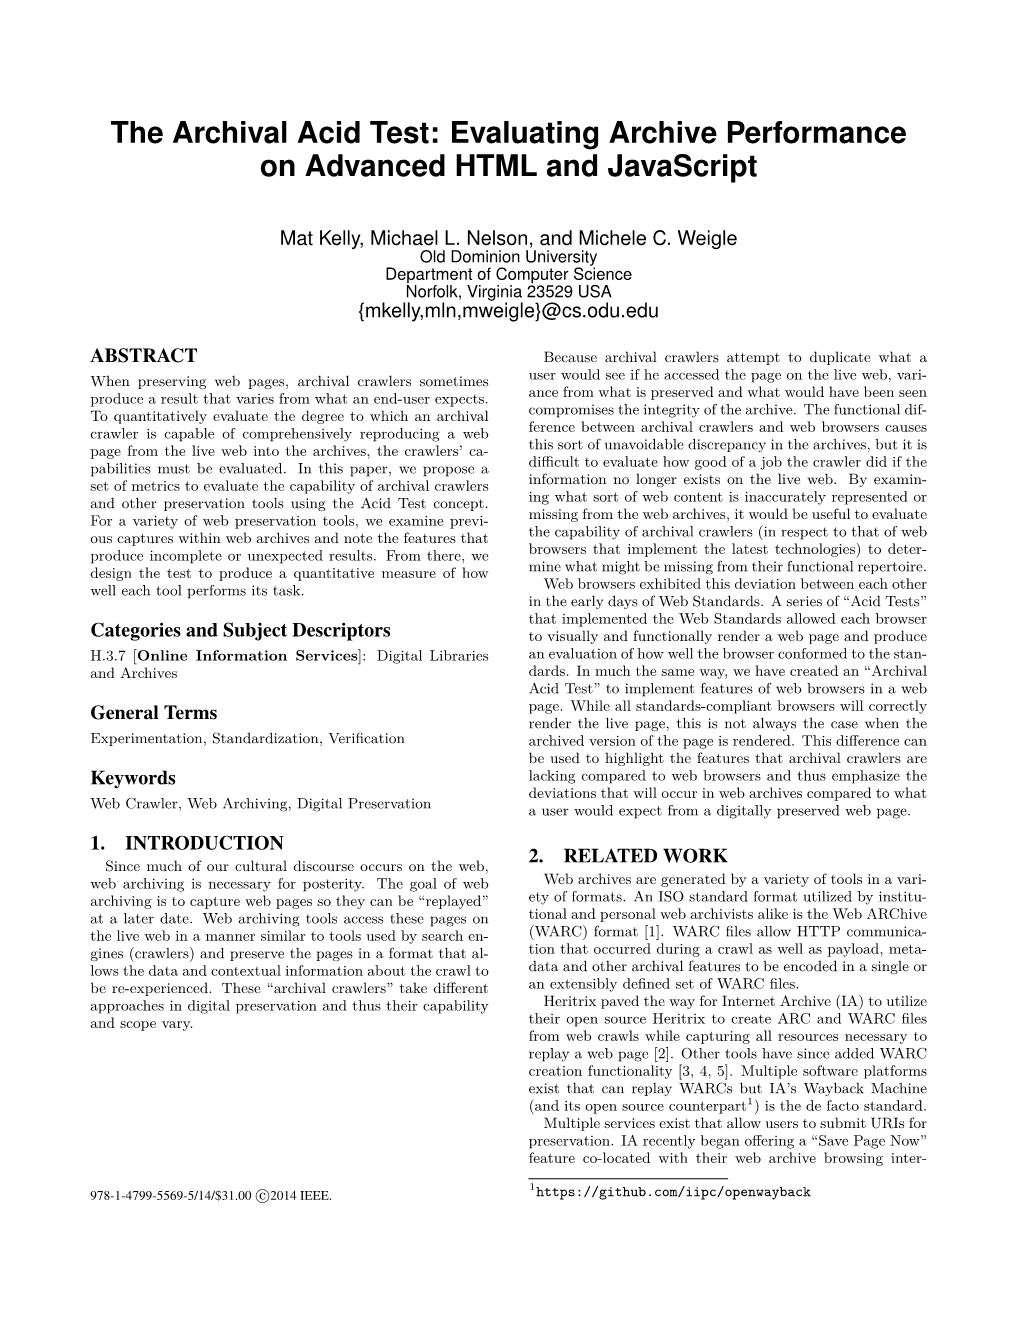 Evaluating Archive Performance on Advanced HTML and Javascript